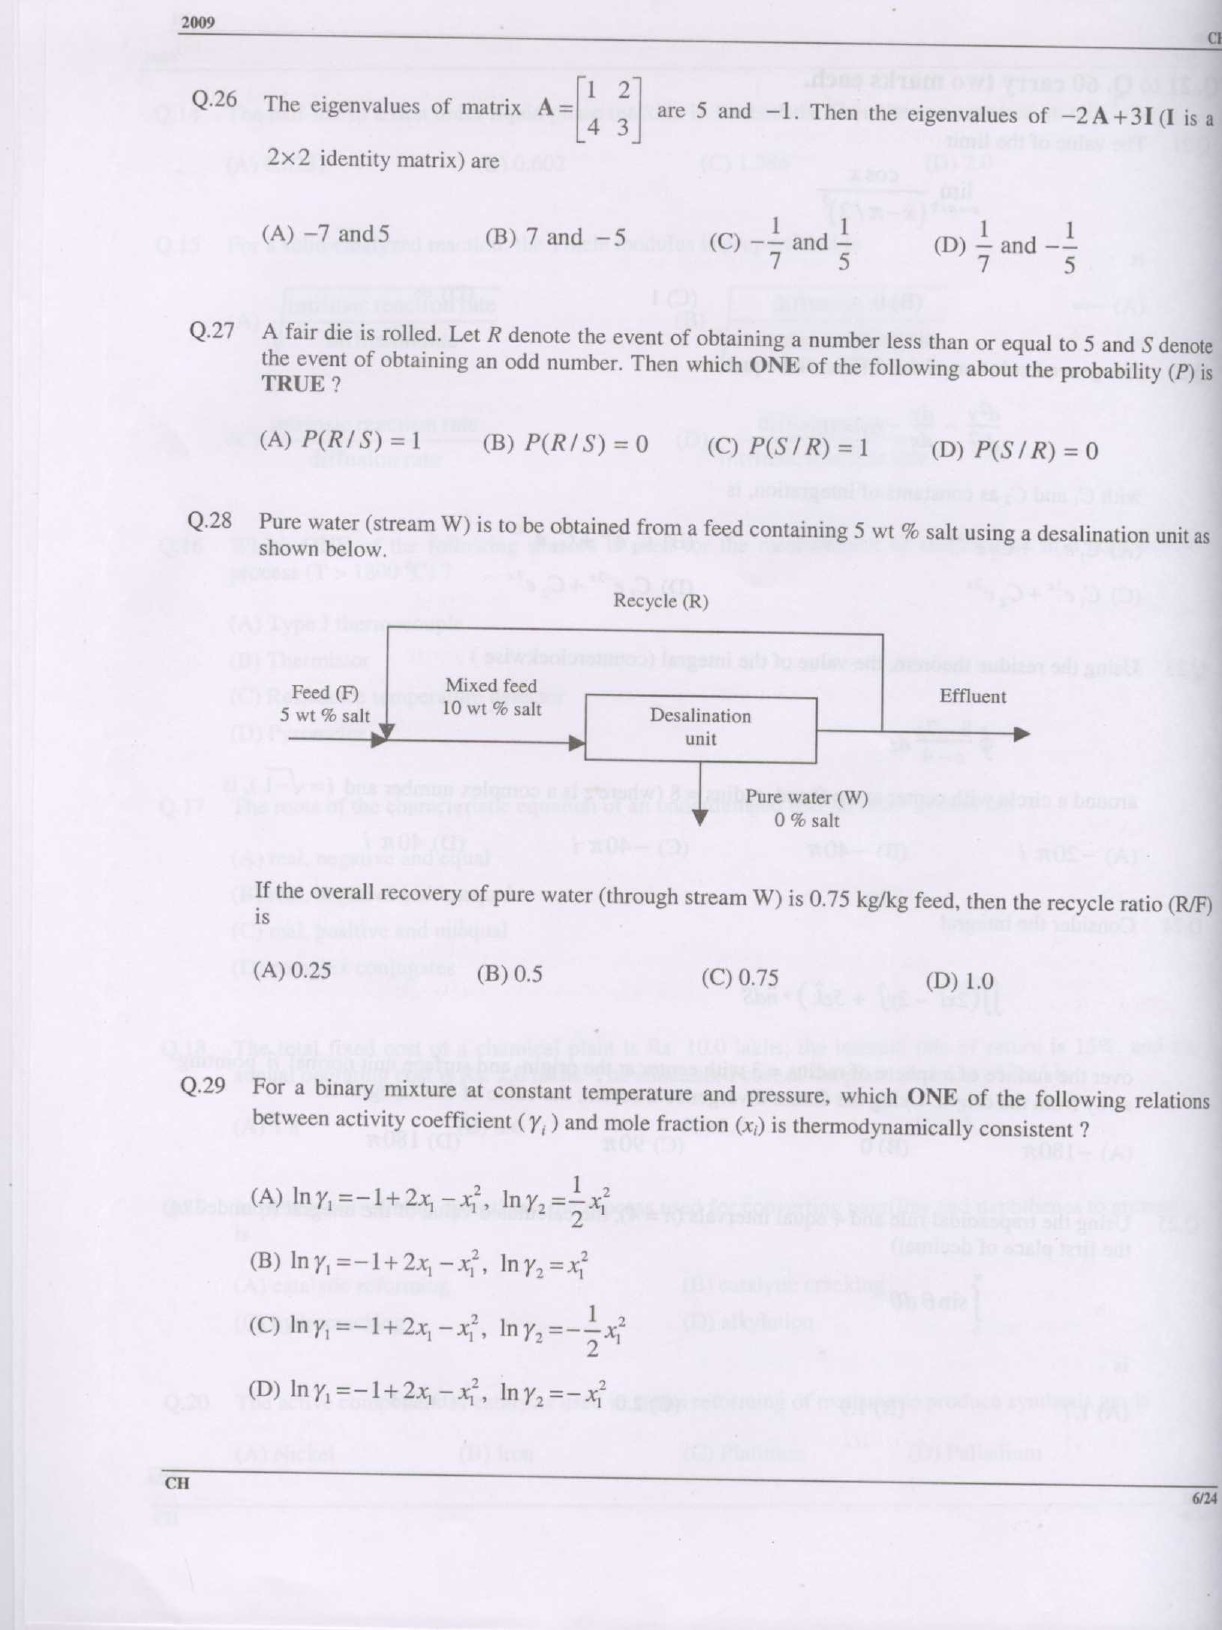 GATE Exam Question Paper 2009 Chemical Engineering 6